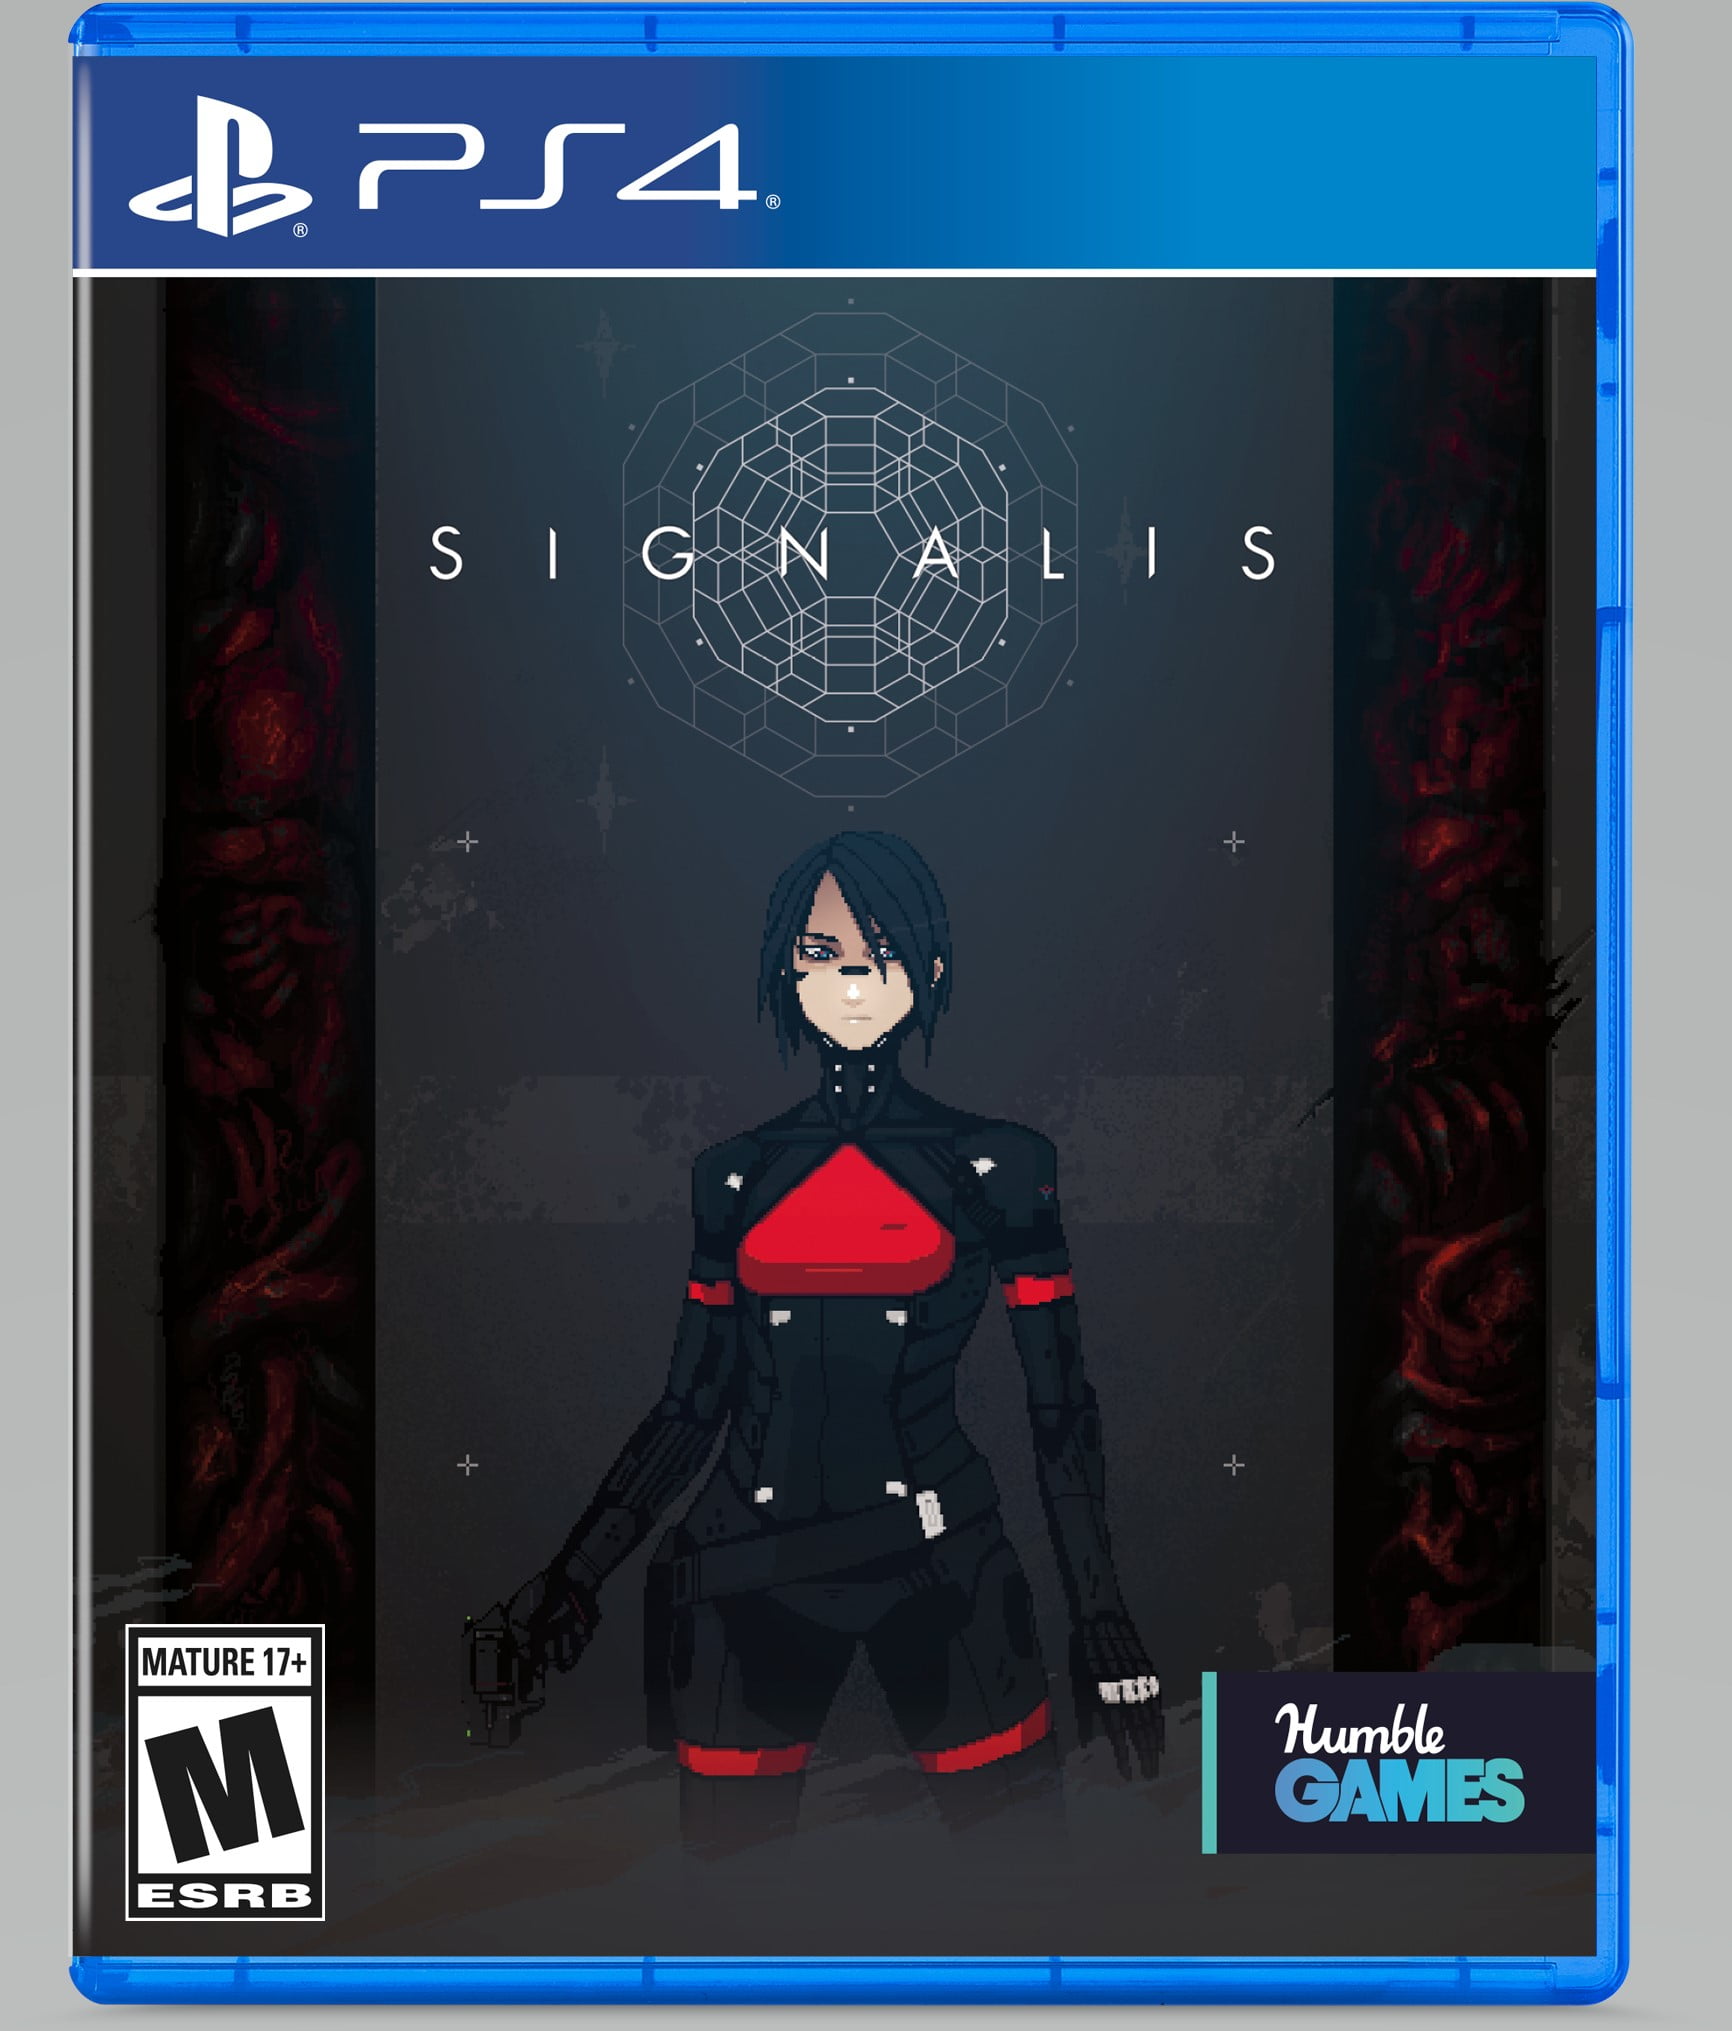 Just couldn't resist the physical version : r/signalis